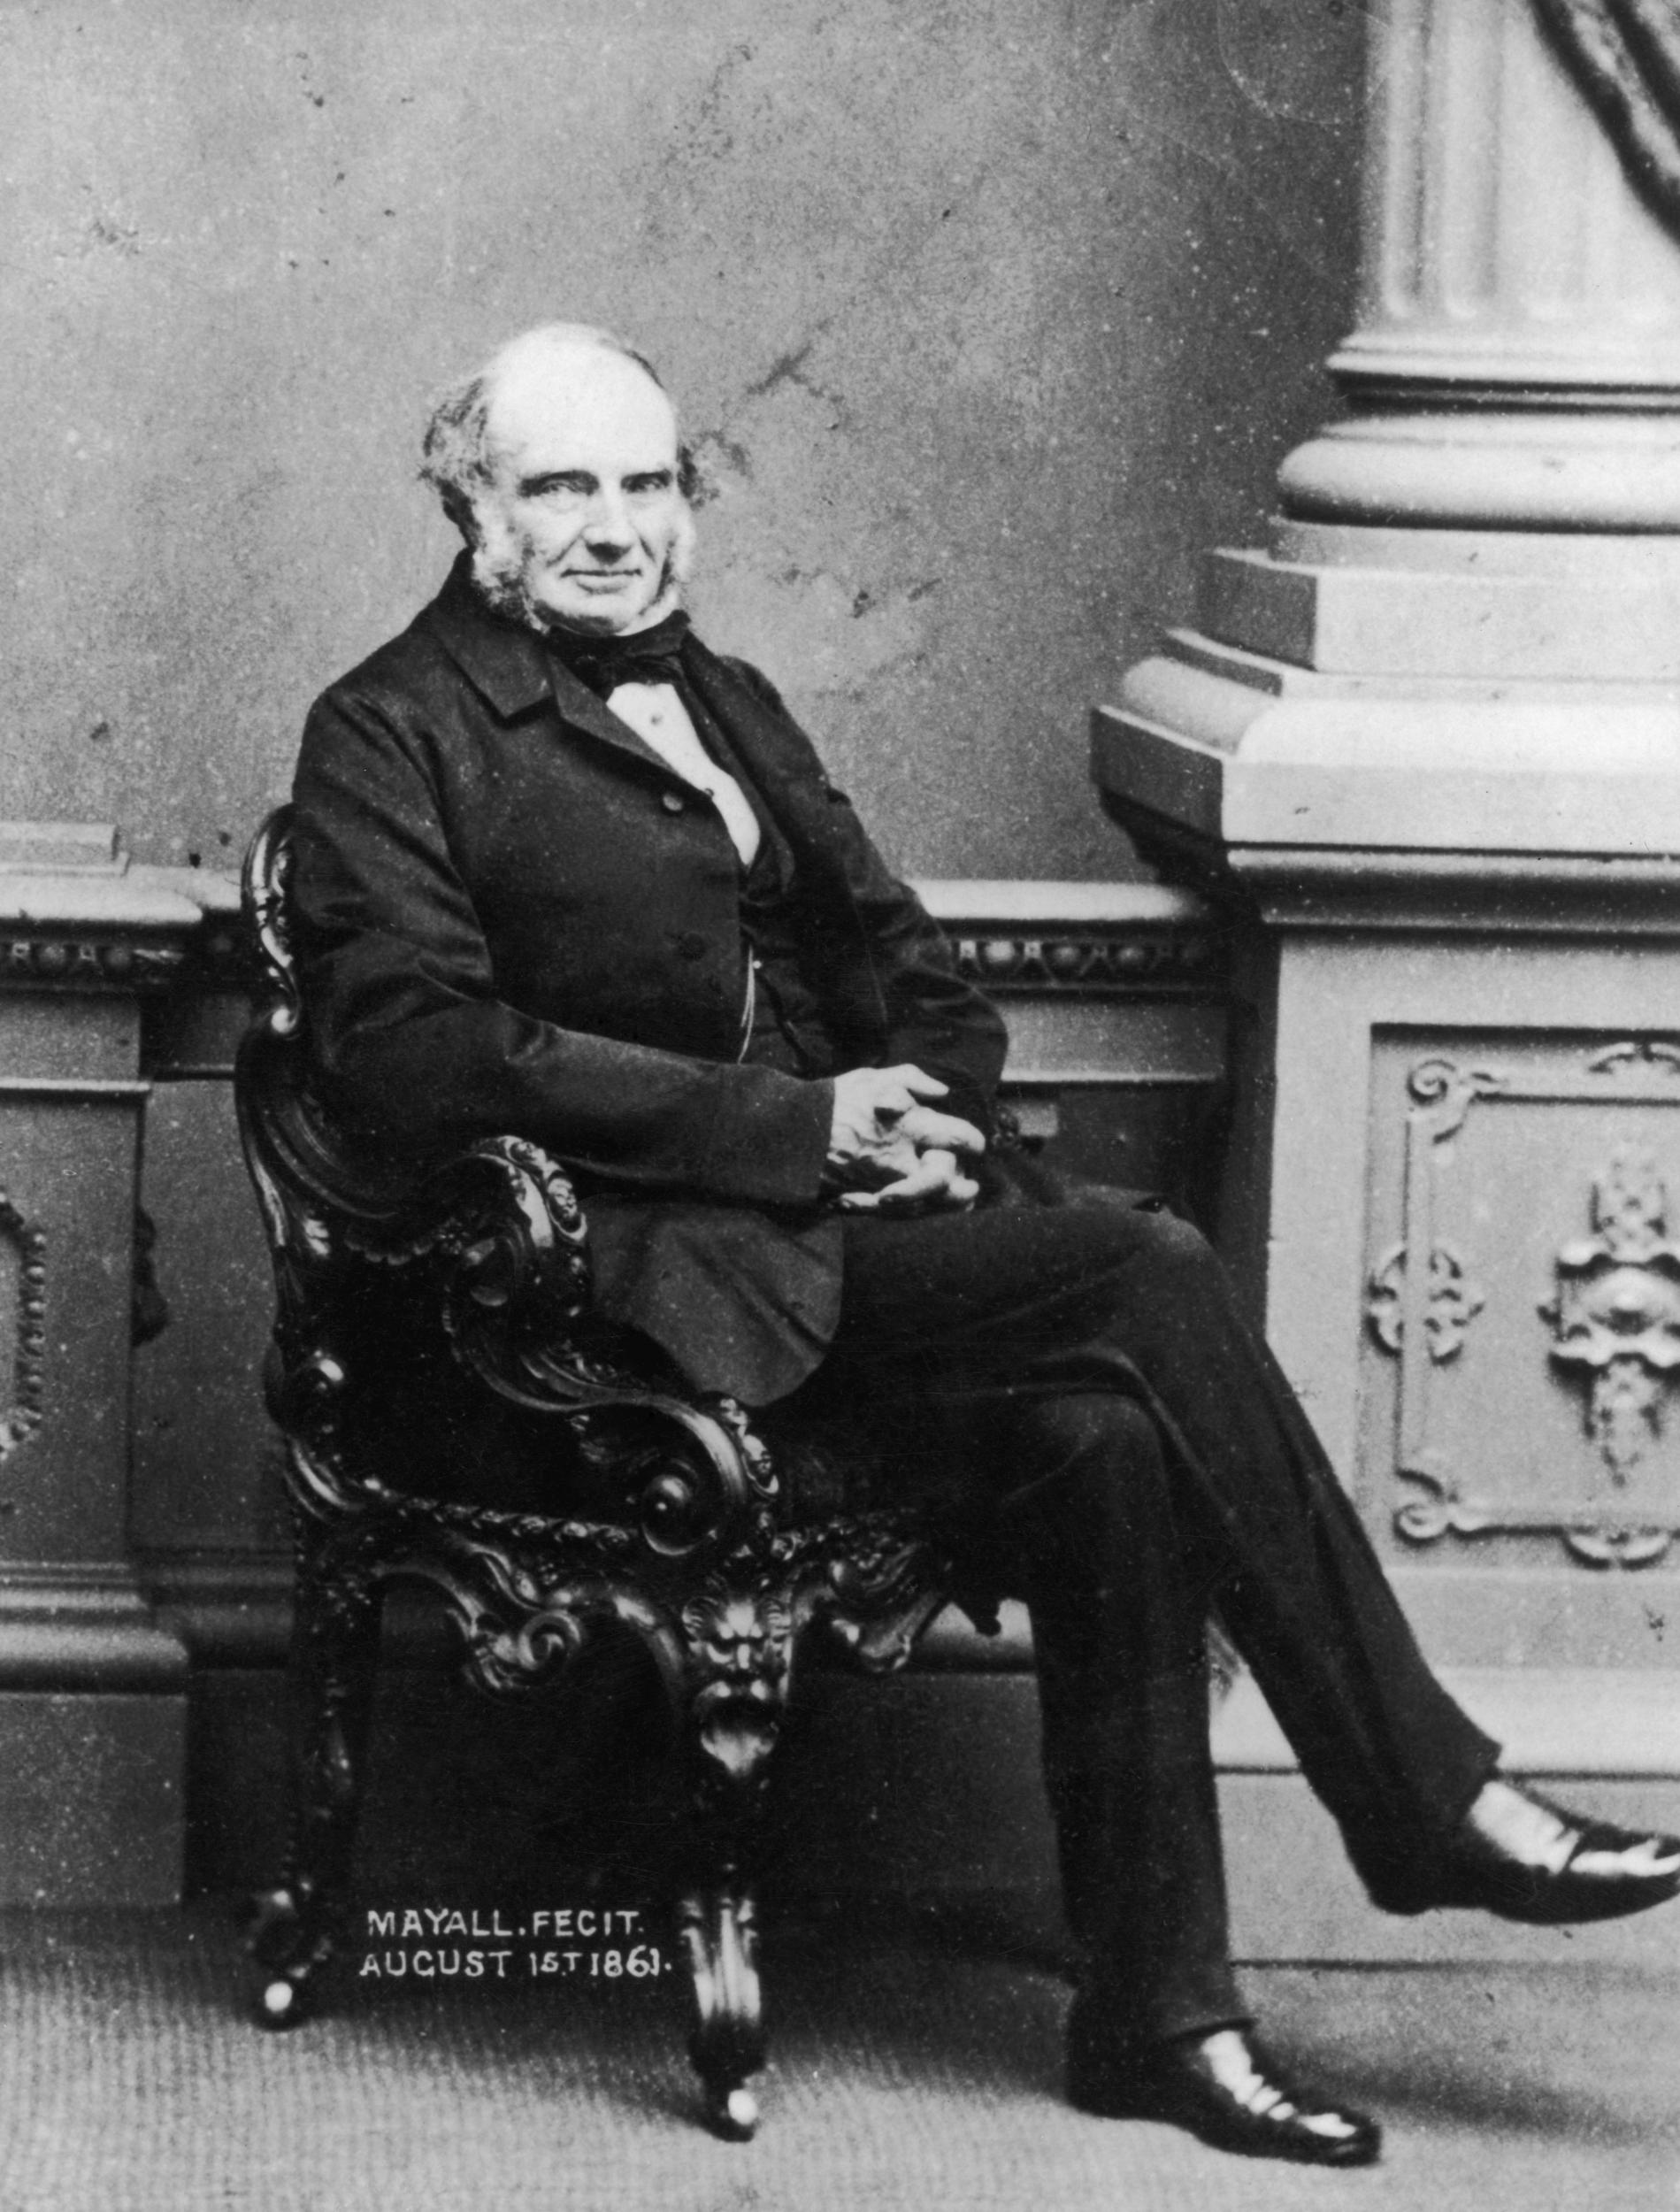 John Russell, 1st Earl Russell, pictured on 1 August 1861, between his two terms in office as prime minister